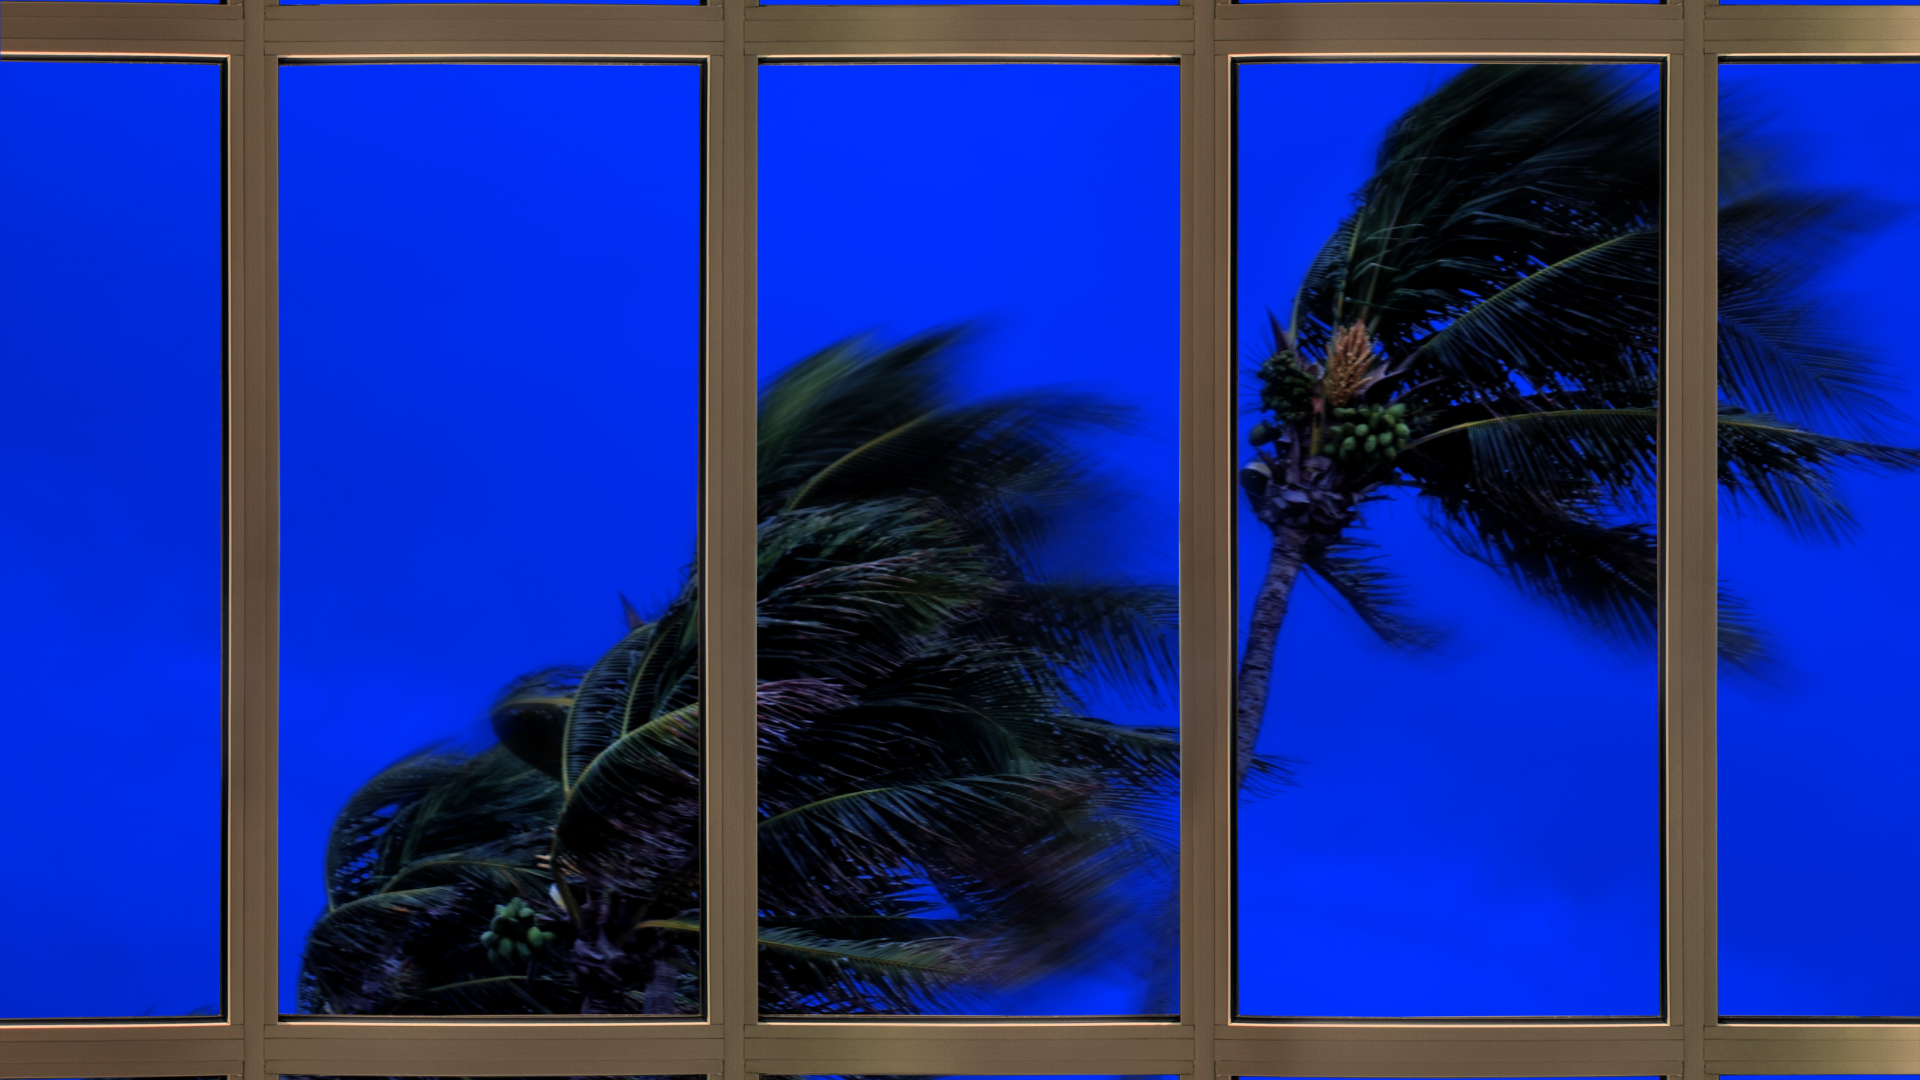 View of palm trees blowing in wind from outside window